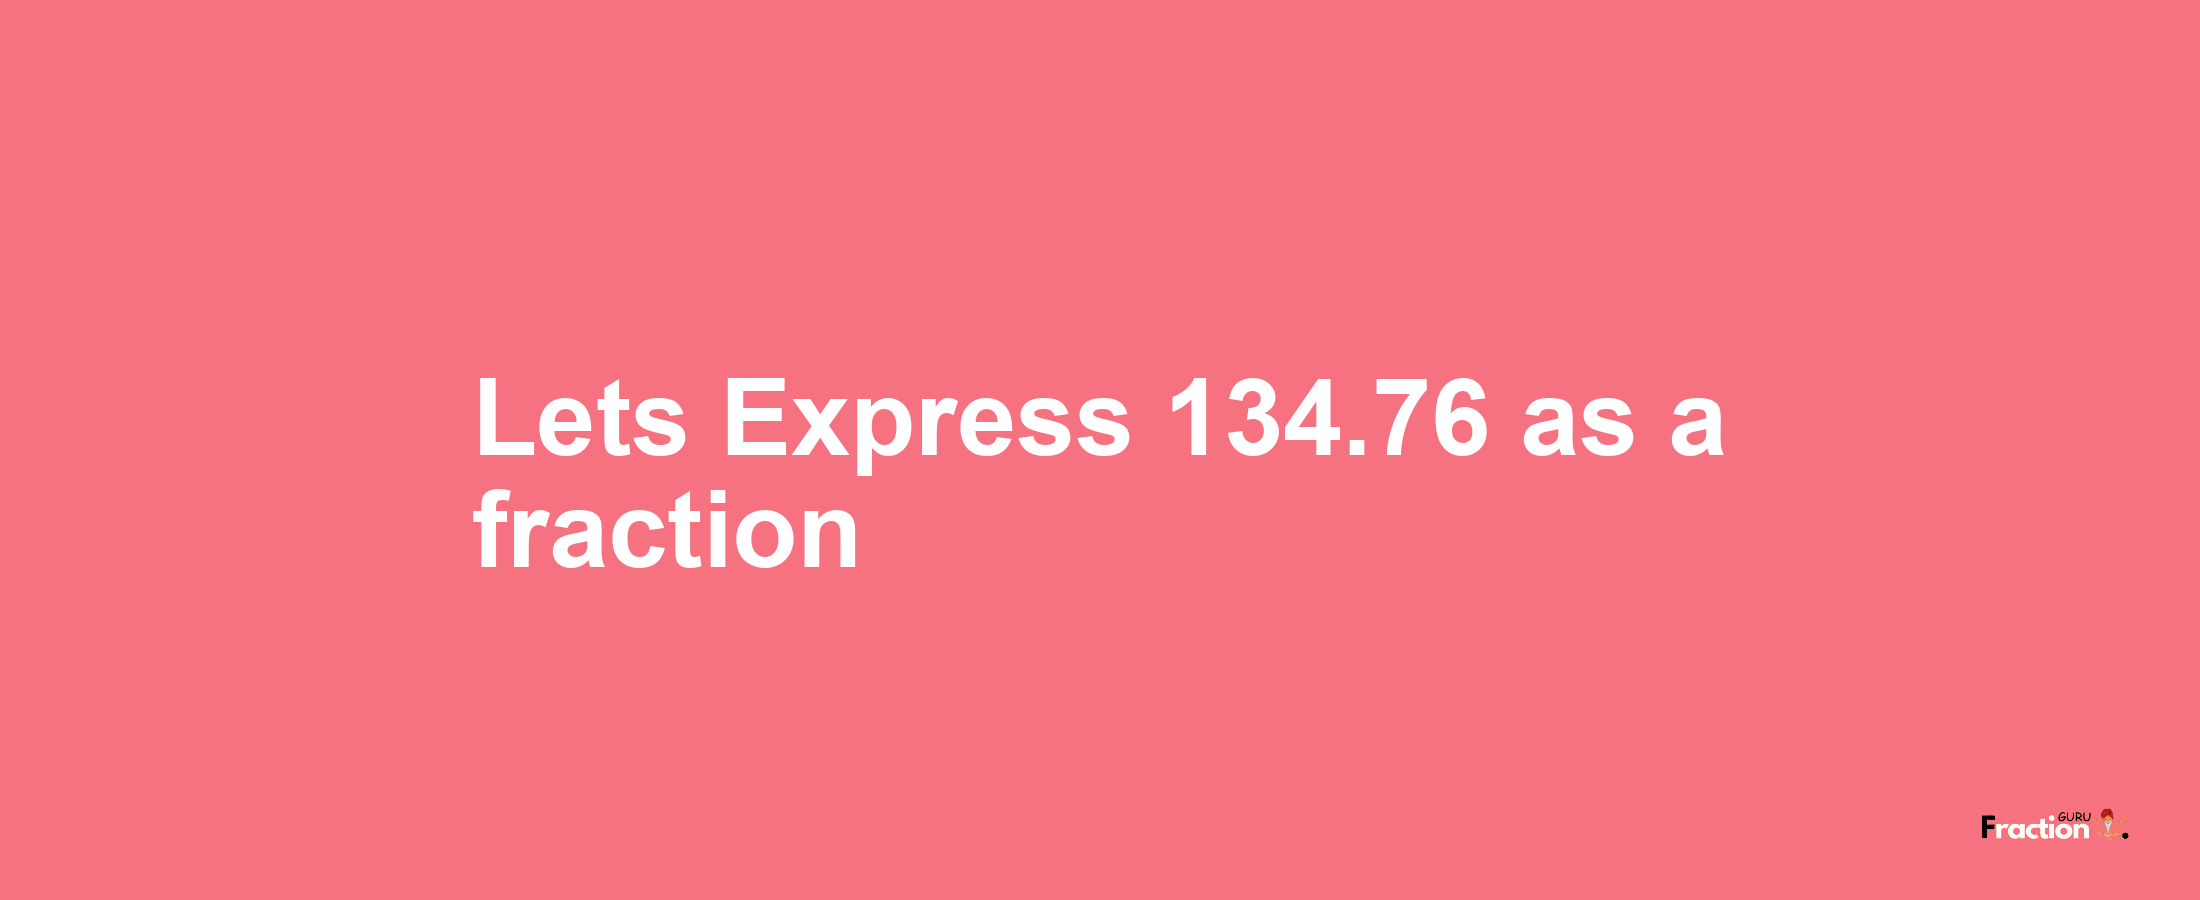 Lets Express 134.76 as afraction